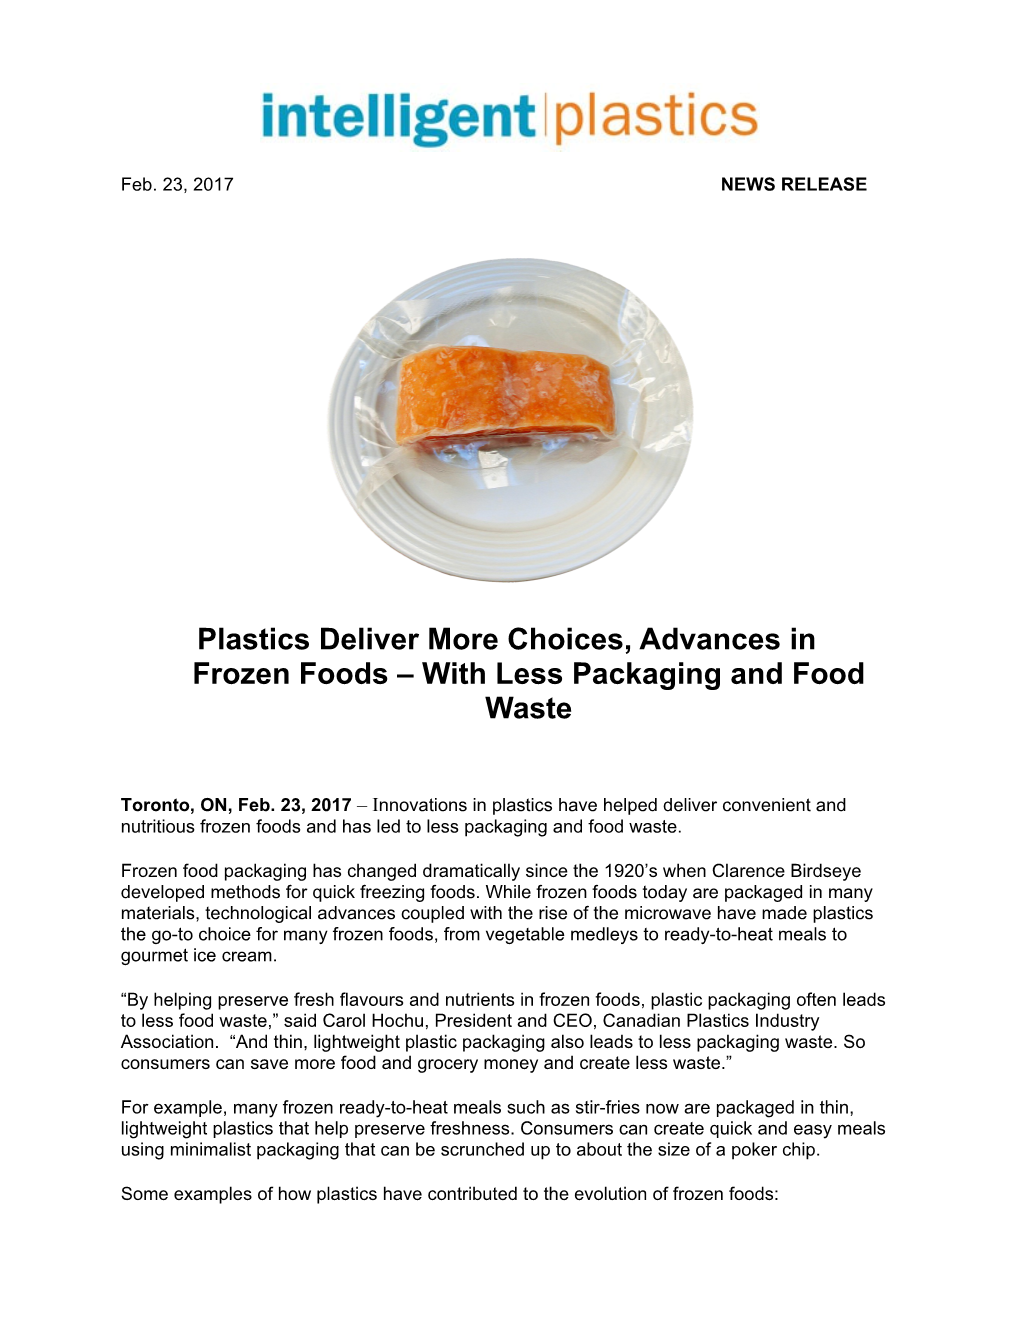 Plastics Deliver More Choices, Advances in Frozen Foods with Less Packaging and Food Waste